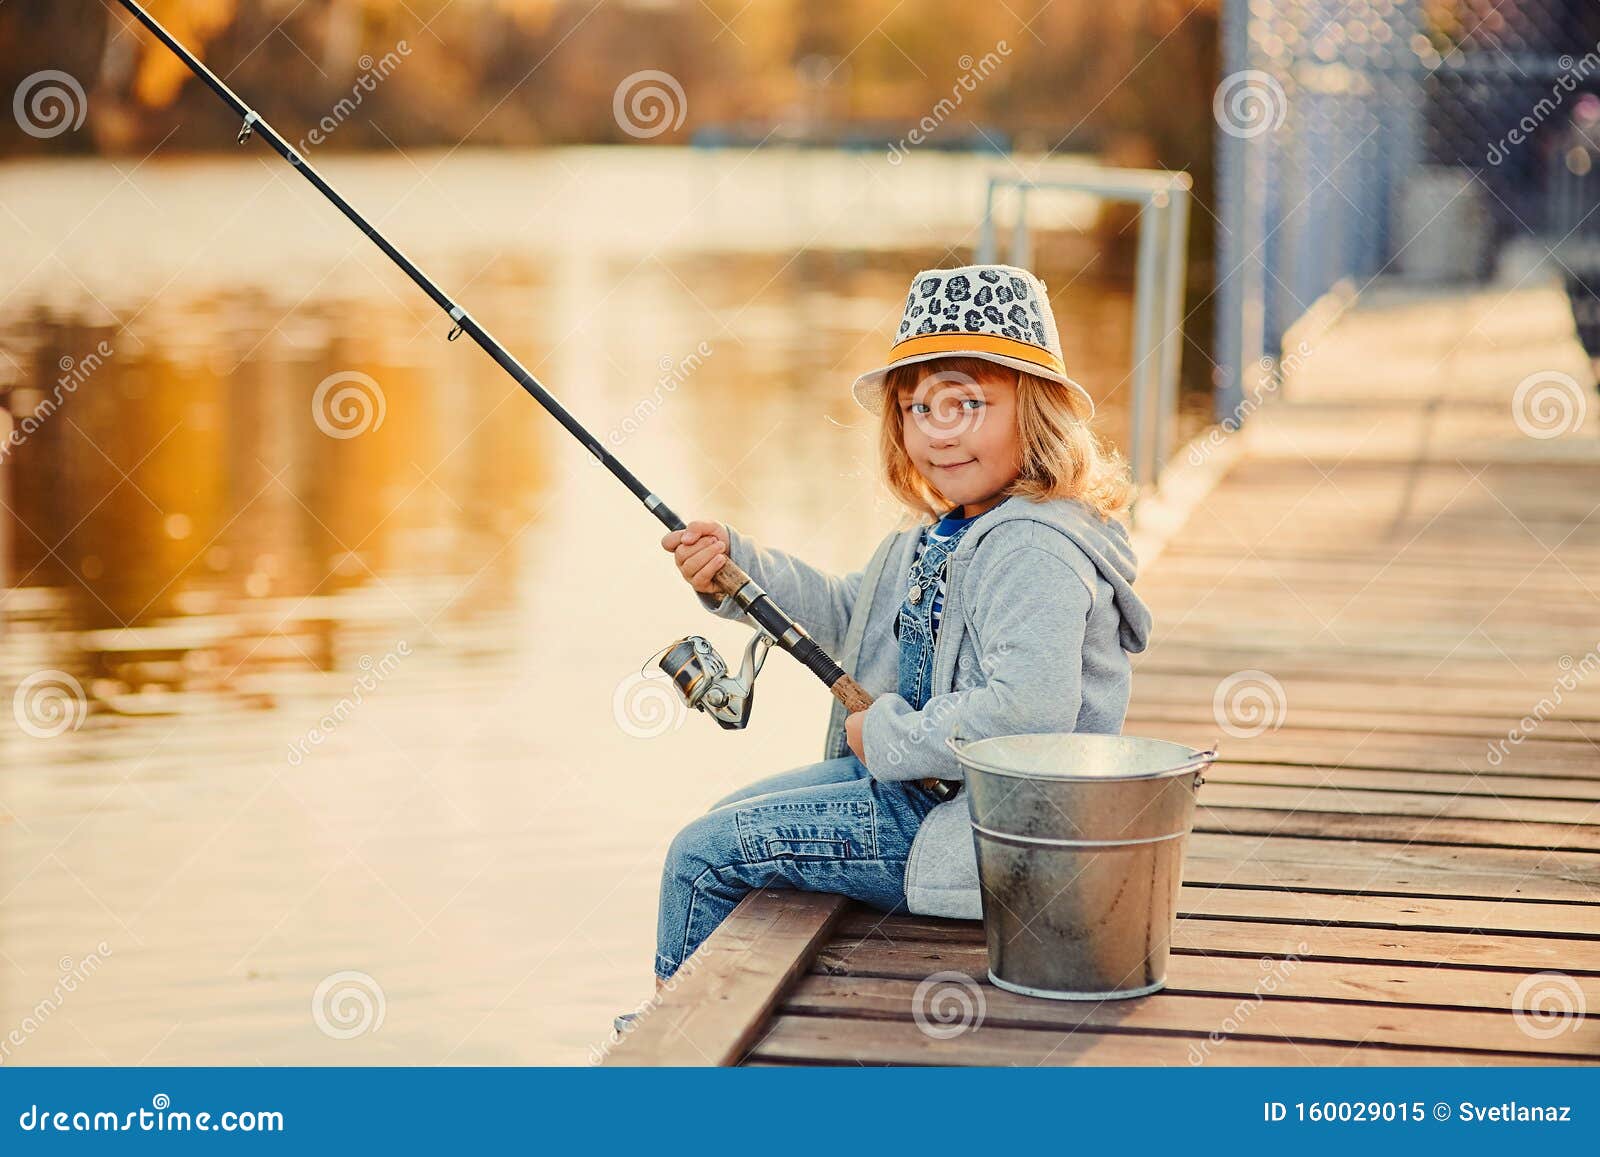 A Little Girl Fishing with a Fishing Rod from a Pontoon or Pier on the Pond  Fish Farm Stock Image - Image of child, little: 160029015